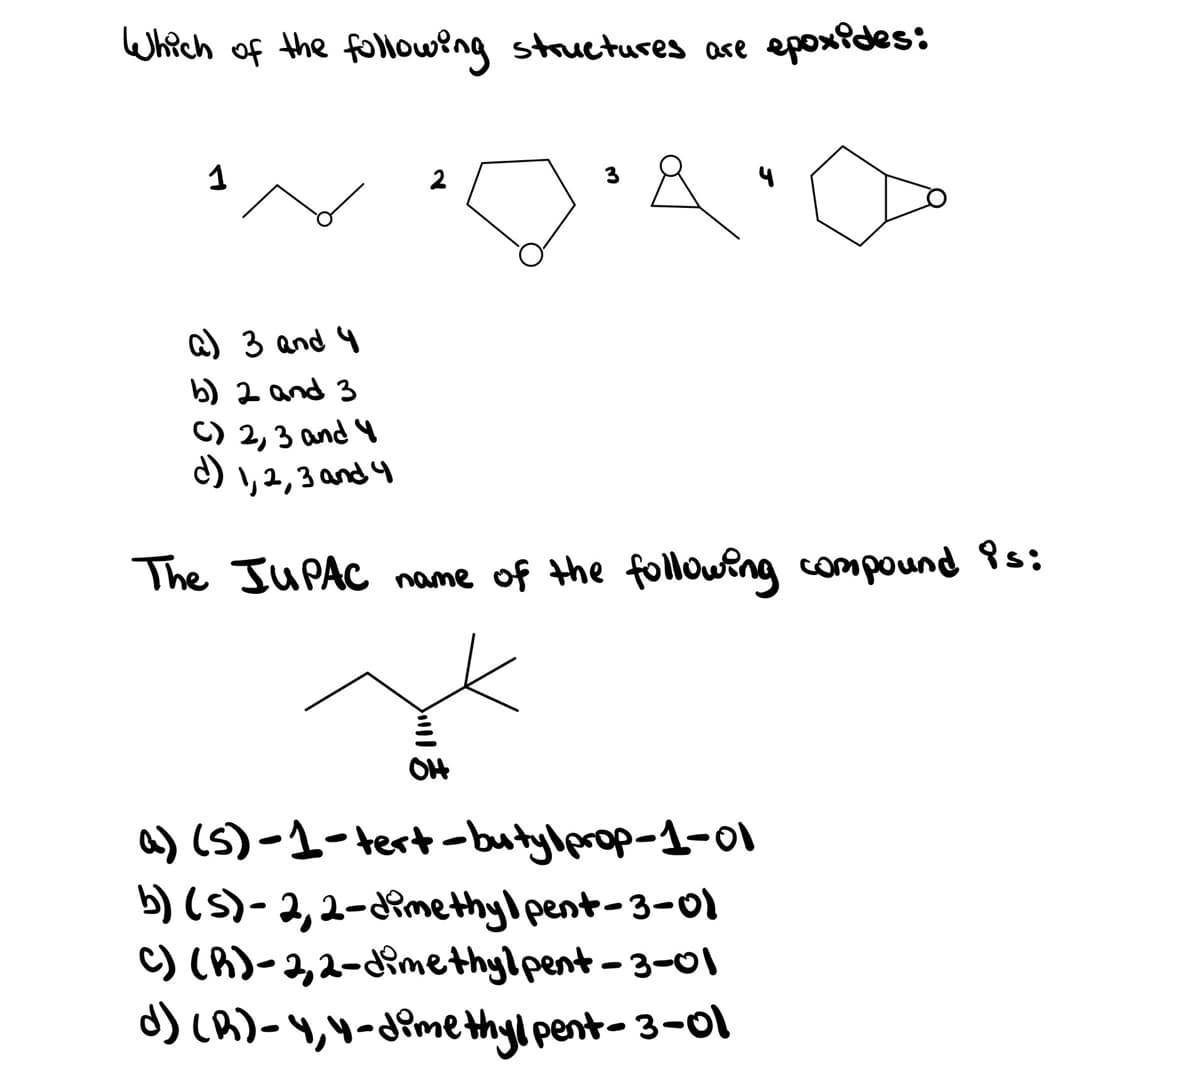 Which of the following stauctures ase epoxides:
2
3
Q) 3 and 4
b) 2 and 3
C) 2, 3 and 4
C) , 2,3 and 4
The JUPAC name of the following compound s:
O4
a) (S)-1-tert-butylprop-1-0I
b) (5)-2,2-Rmethyl pent-3-01
C) (A)-2,2-imethylpent-3-01
d) LA)-,4-dimethylpent- 3-0l
